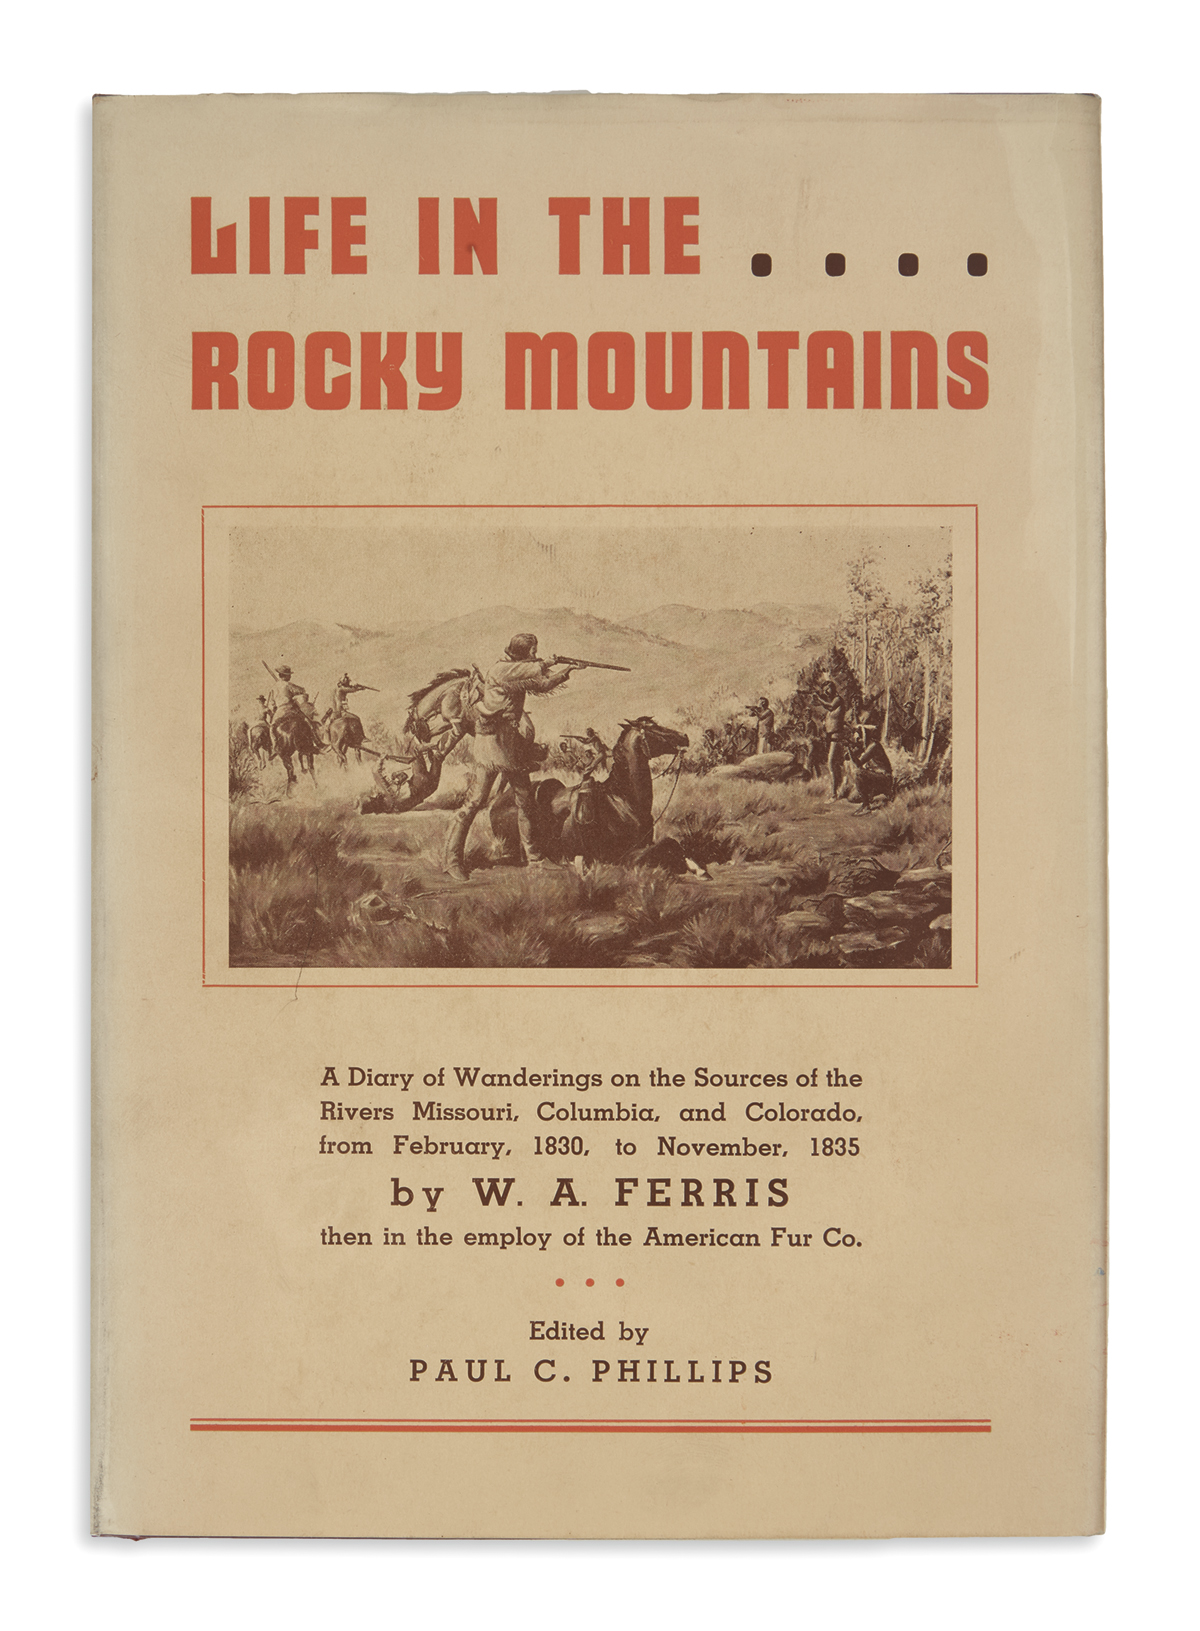 (WEST.) Ferris, W.A. Life in the Rocky Mountains: A Diary of Wanderings . . . from February 1830 to November 1835.